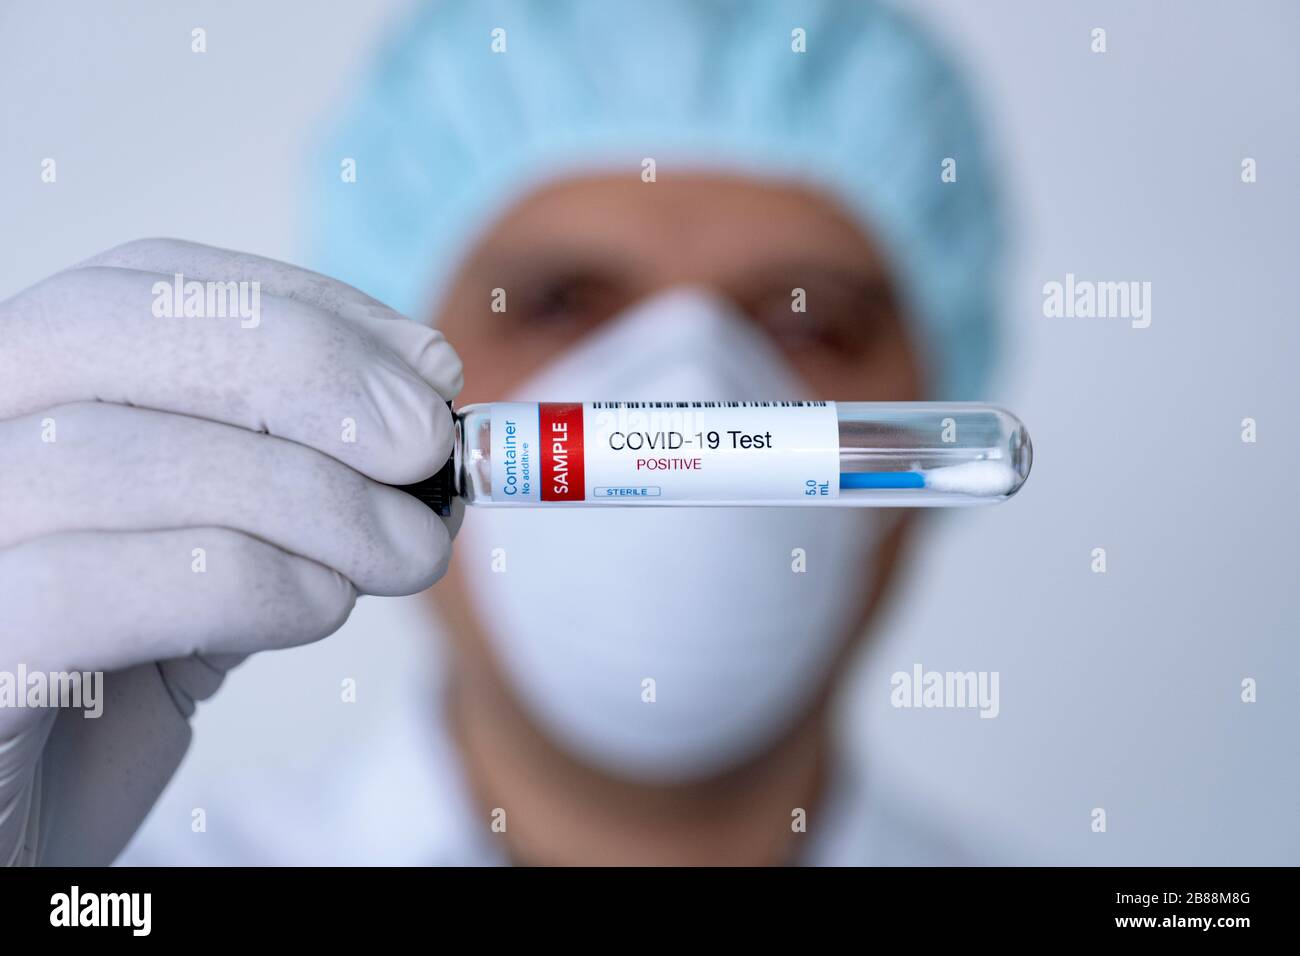 Testing for presence of coronavirus. Doctor holding a tube containing a swab sample for COVID-19 that has tested positive. Stock Photo